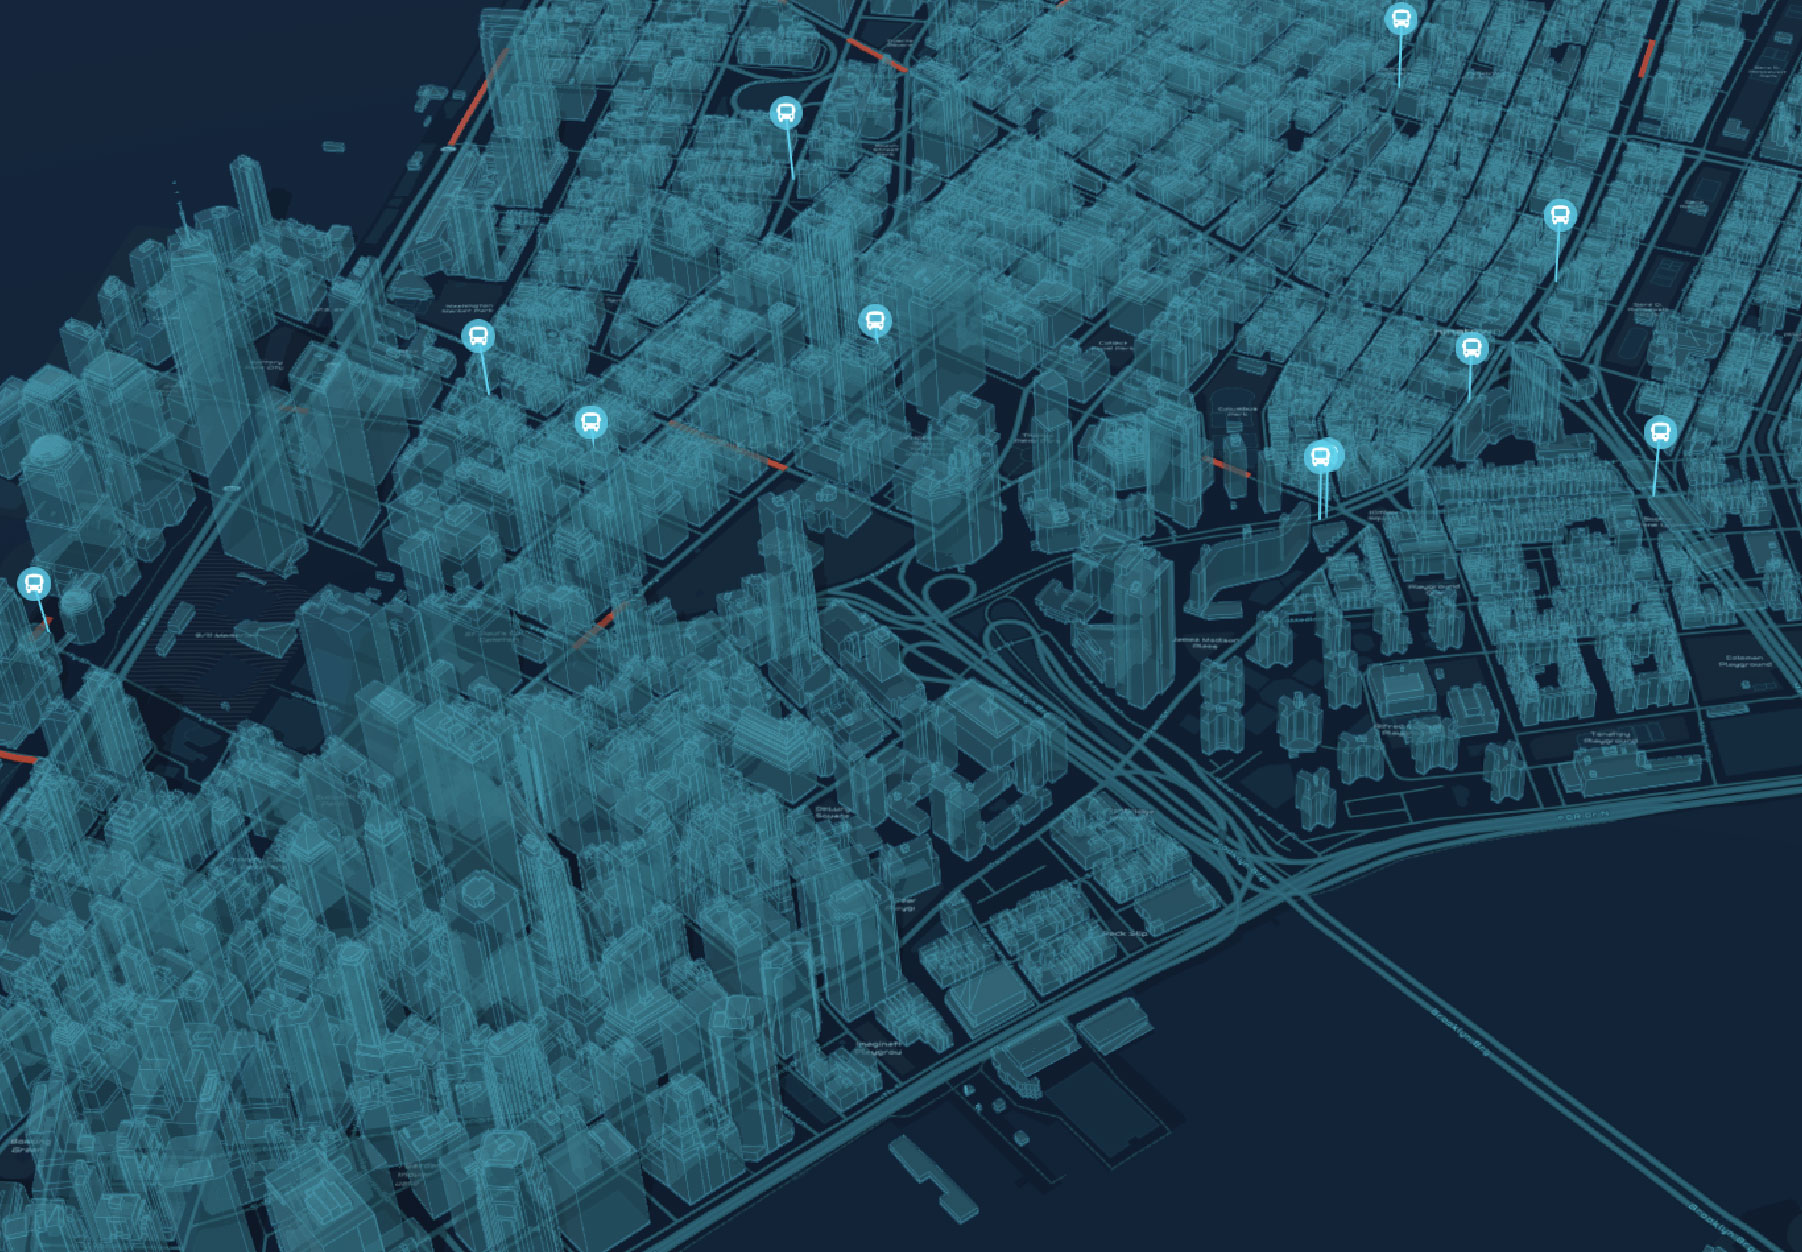 A 3D digital model of lower Manhattan, New York, with blue marker icons pinpointing city bus locations 